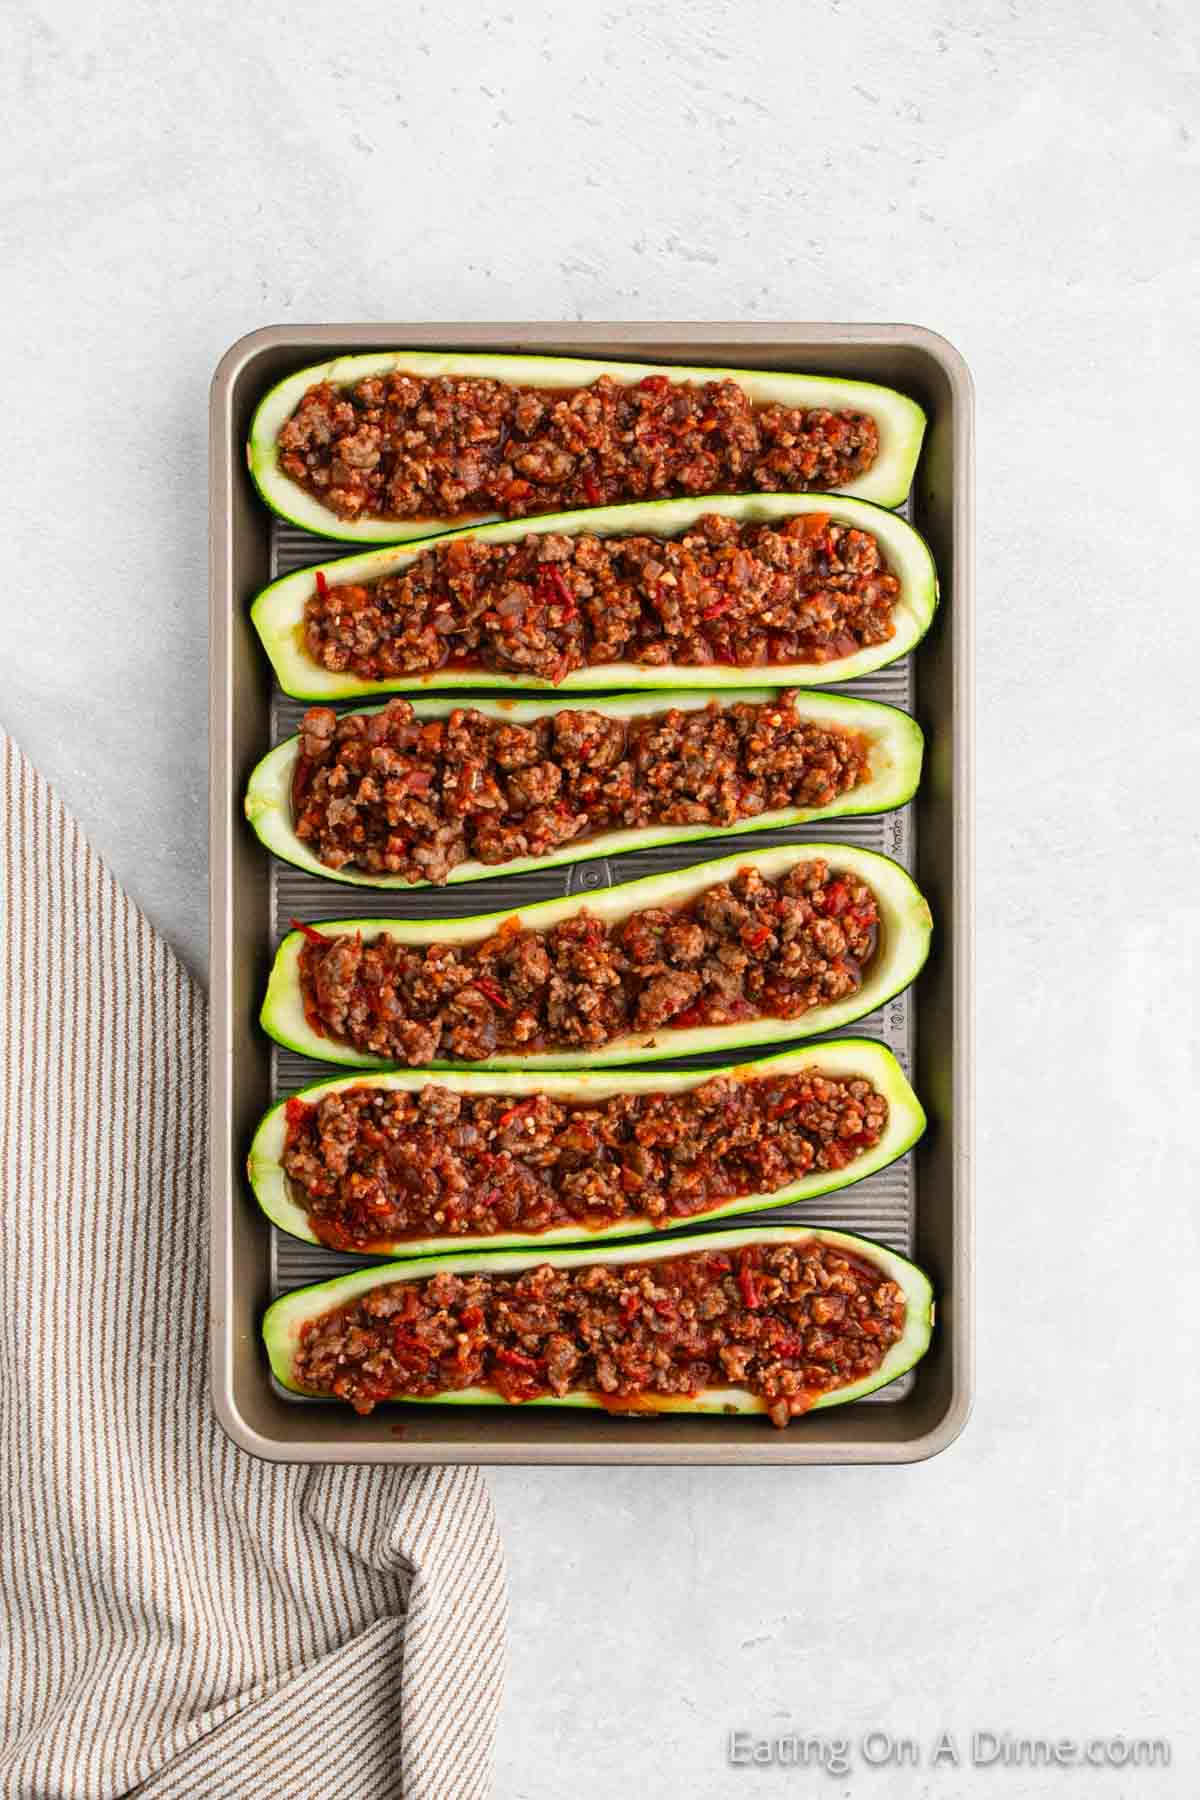 A baking tray with six zucchini halves stuffed with a ground meat and tomato filling, arranged in two rows. The stuffed zucchini boats recipe is displayed on a light-colored surface with a beige and white striped cloth placed next to it.